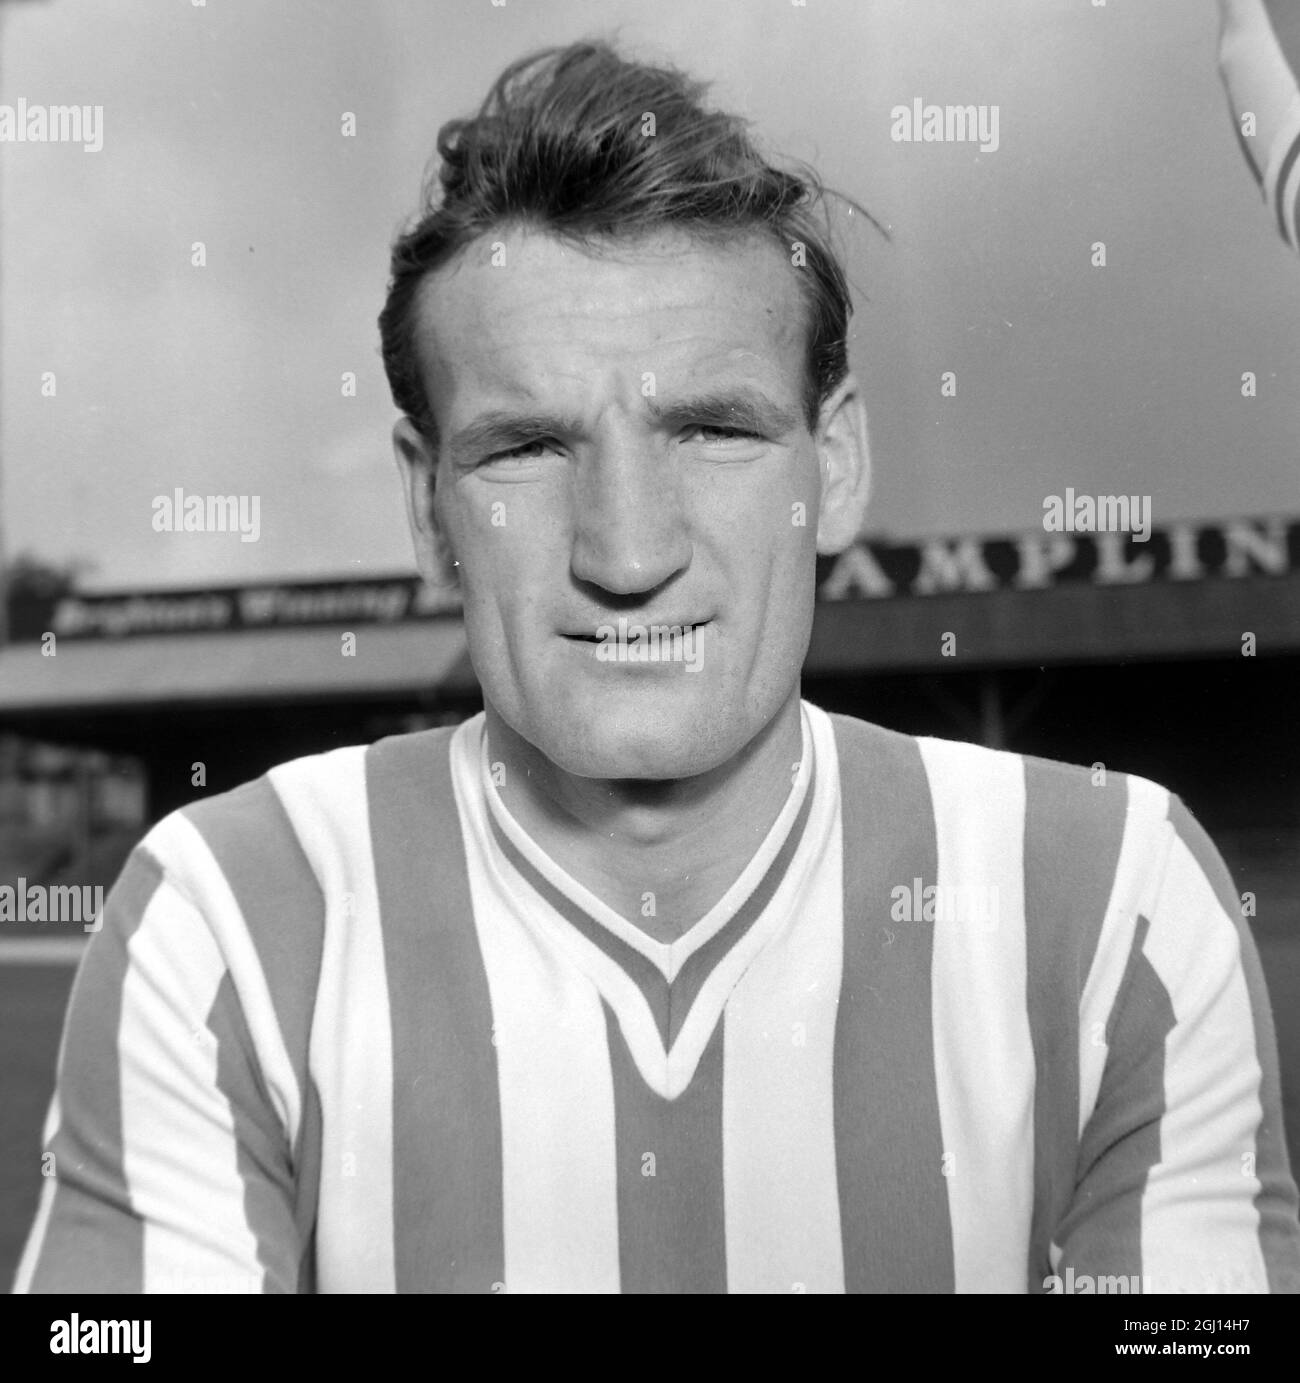 ROY JENNINGS - PORTRAIT OF FOOTBALLER, PLAYER OF BRIGHTON & HOVE FC FOOTBALL CLUB TEAM - ; 9 AUGUST 1962 Stock Photo